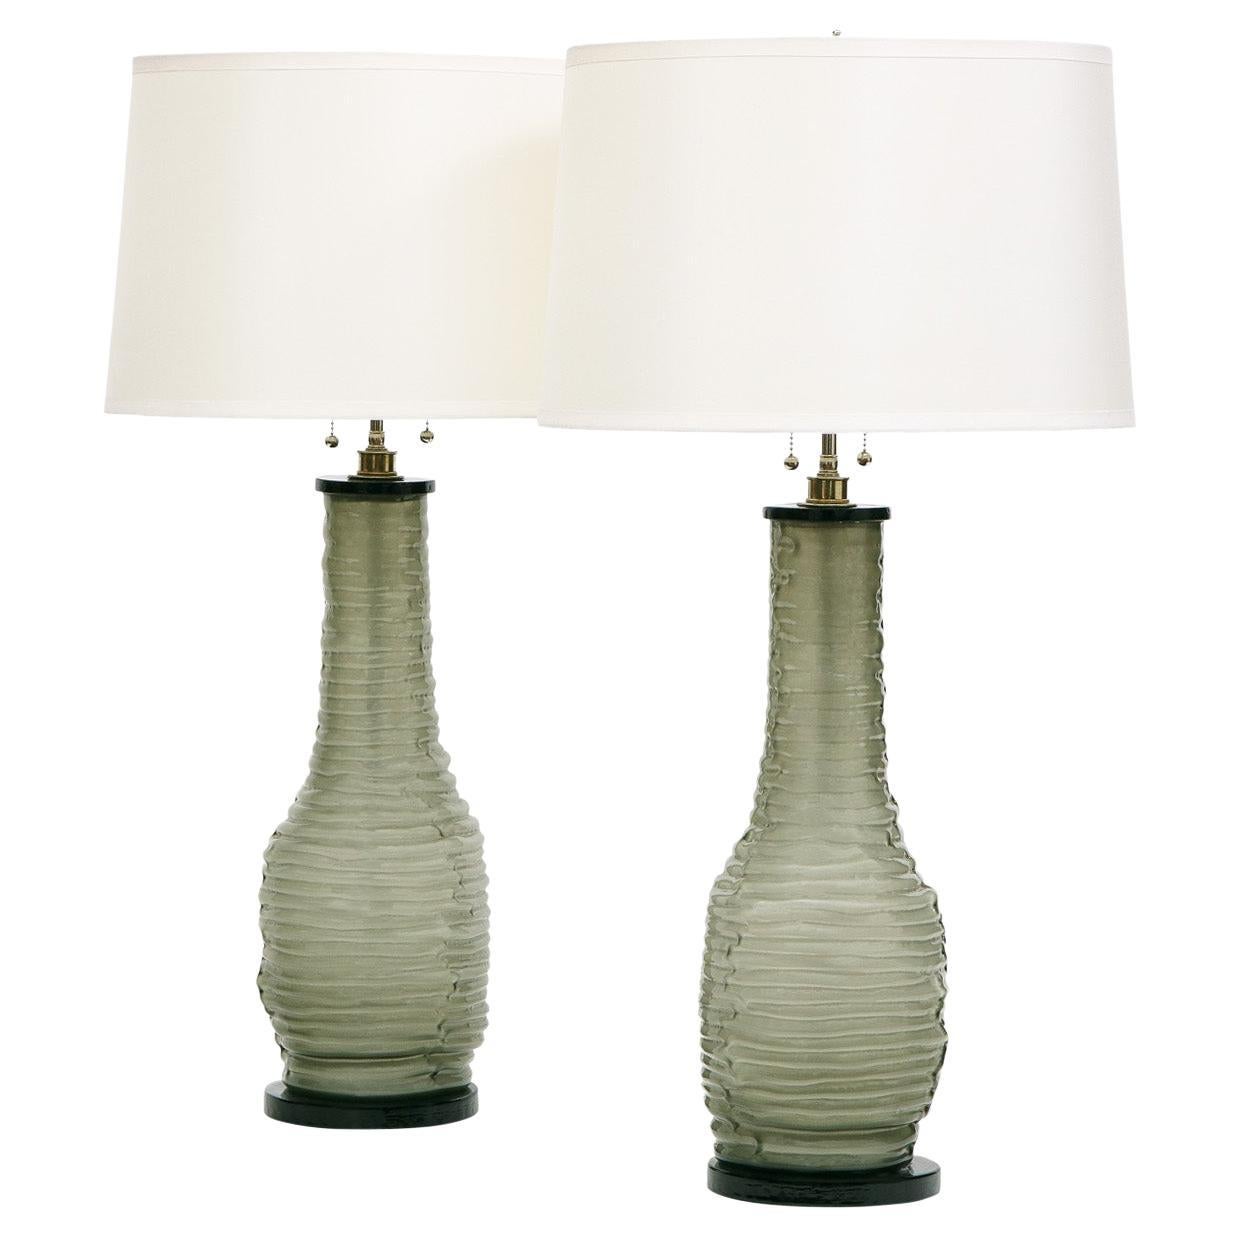 Pair of Artisan Hand-Blown Glass Table Lamps, 1970s